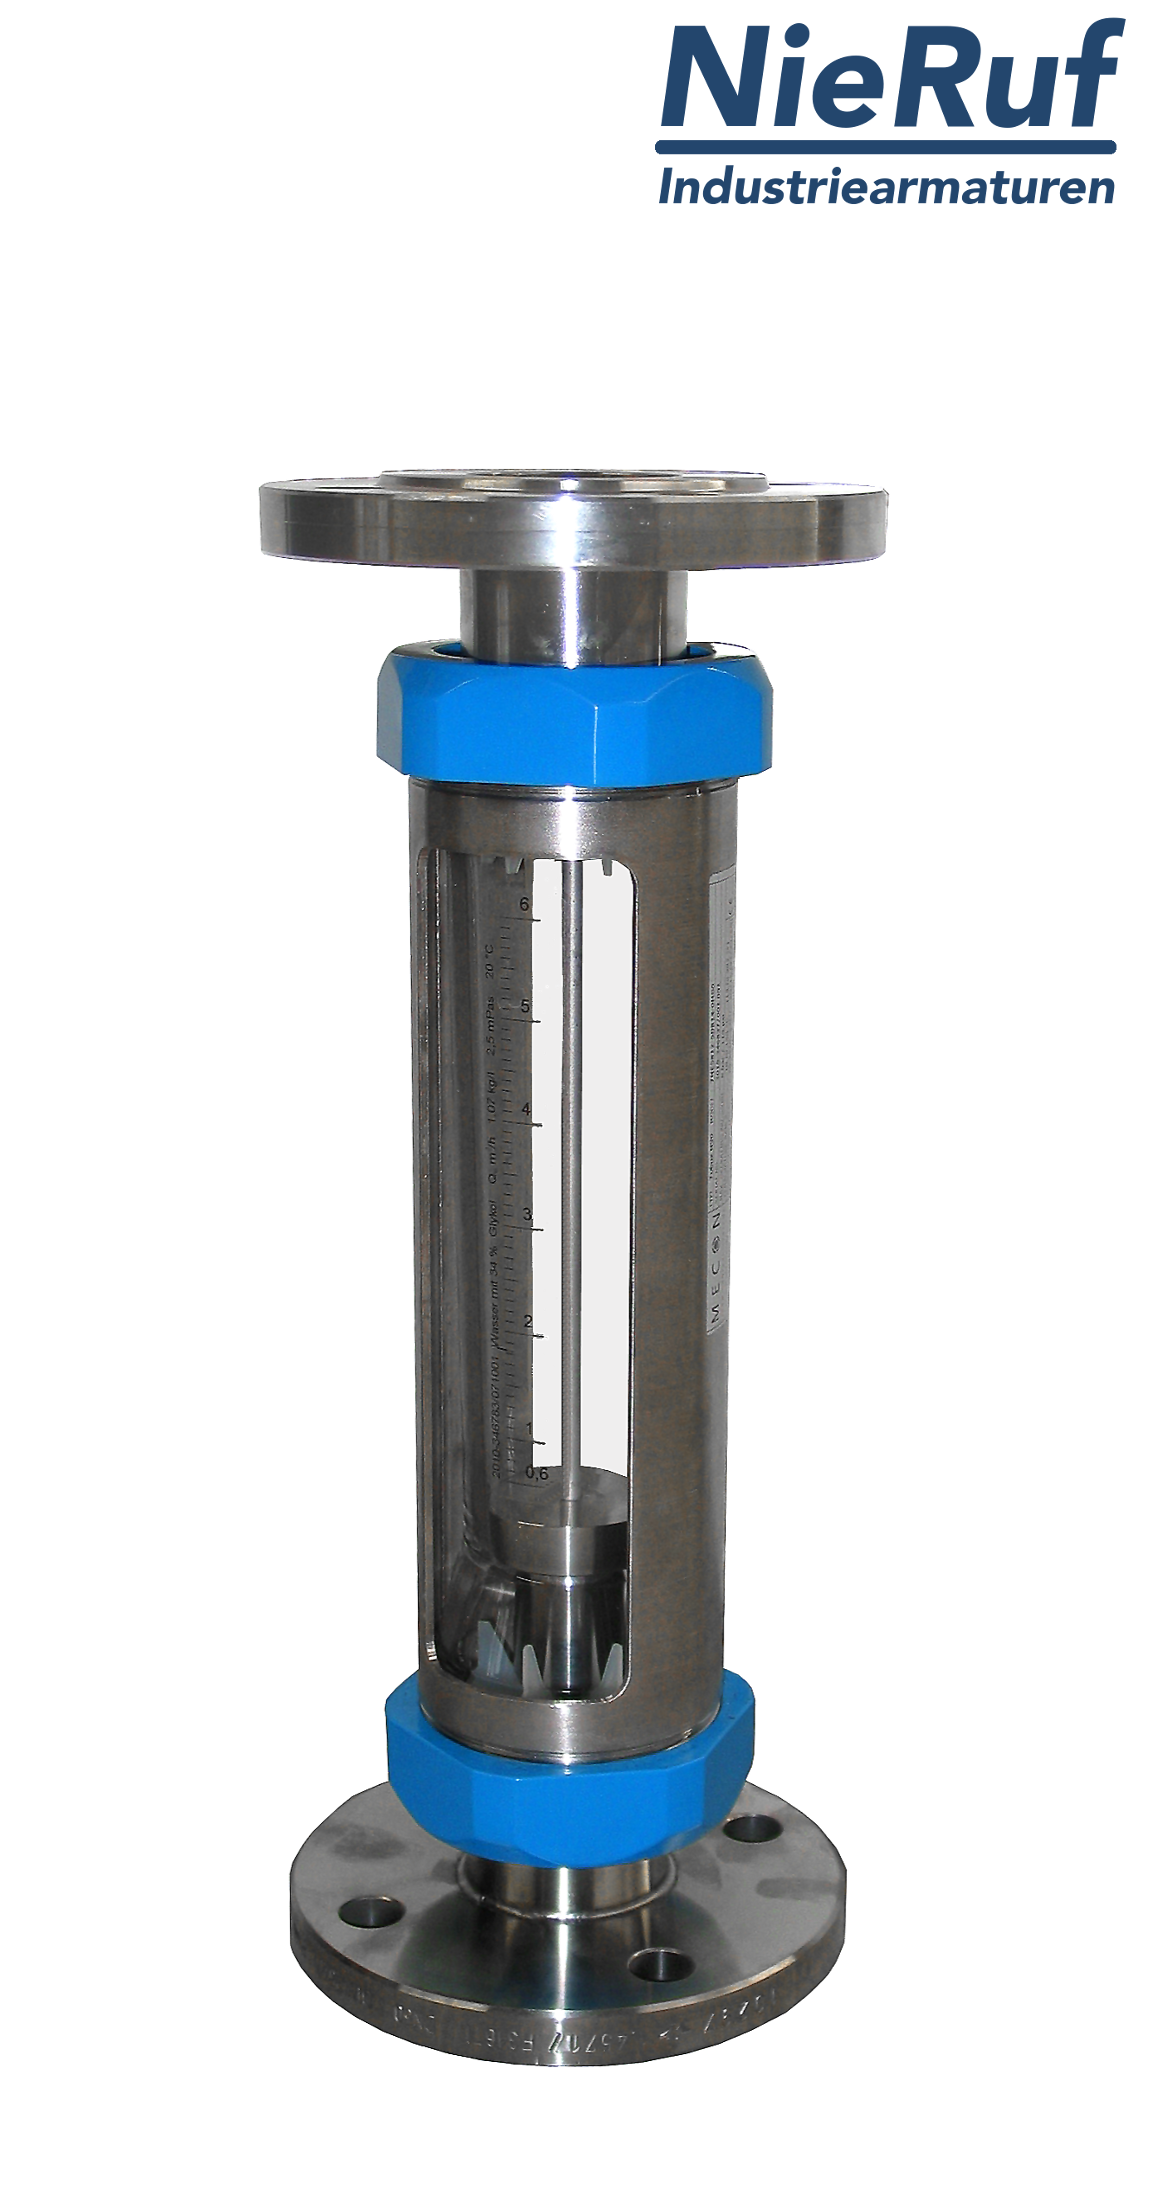 Variable area flowmeter stainless steel + borosilicate flange DN15 1.0 - 10.0 l/h water FKM